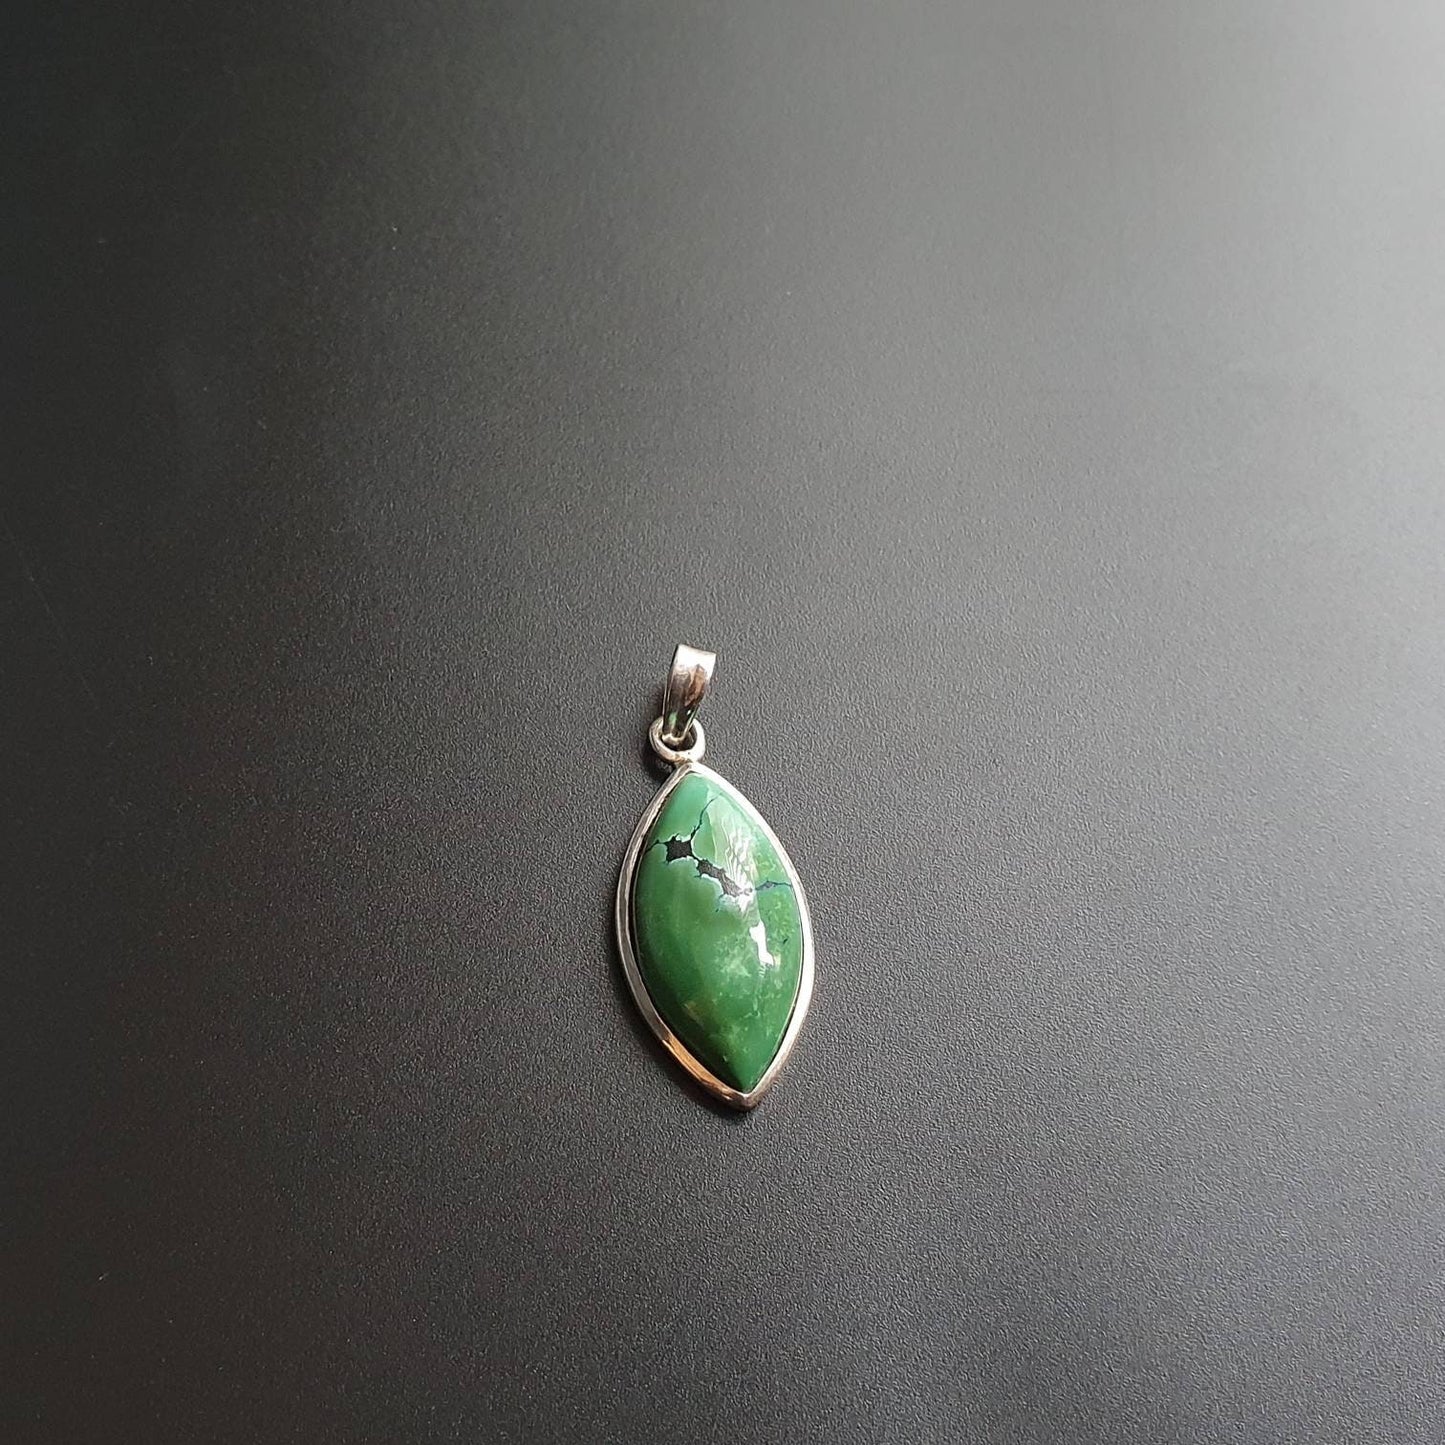 Turquoise Jewellery, Silver Pendant, Green Turquoise gemstone, Sterling Silver Vintage Pendant Necklace, Gift,marquise Gemstone Pendant